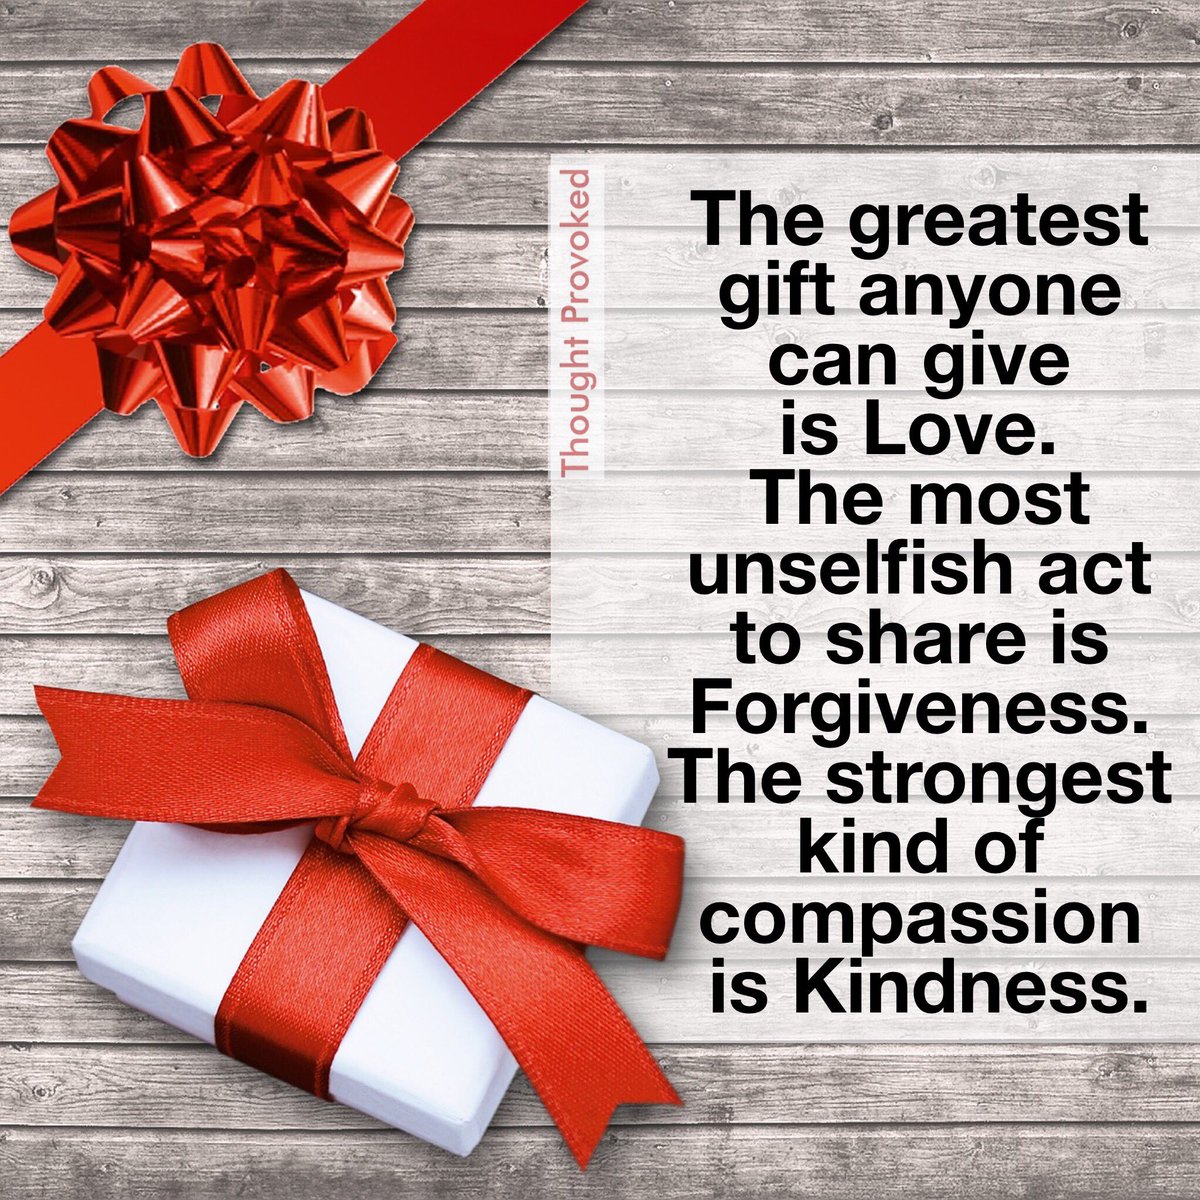 The greatest gift anyone can give is love. #motivation #IQRTG